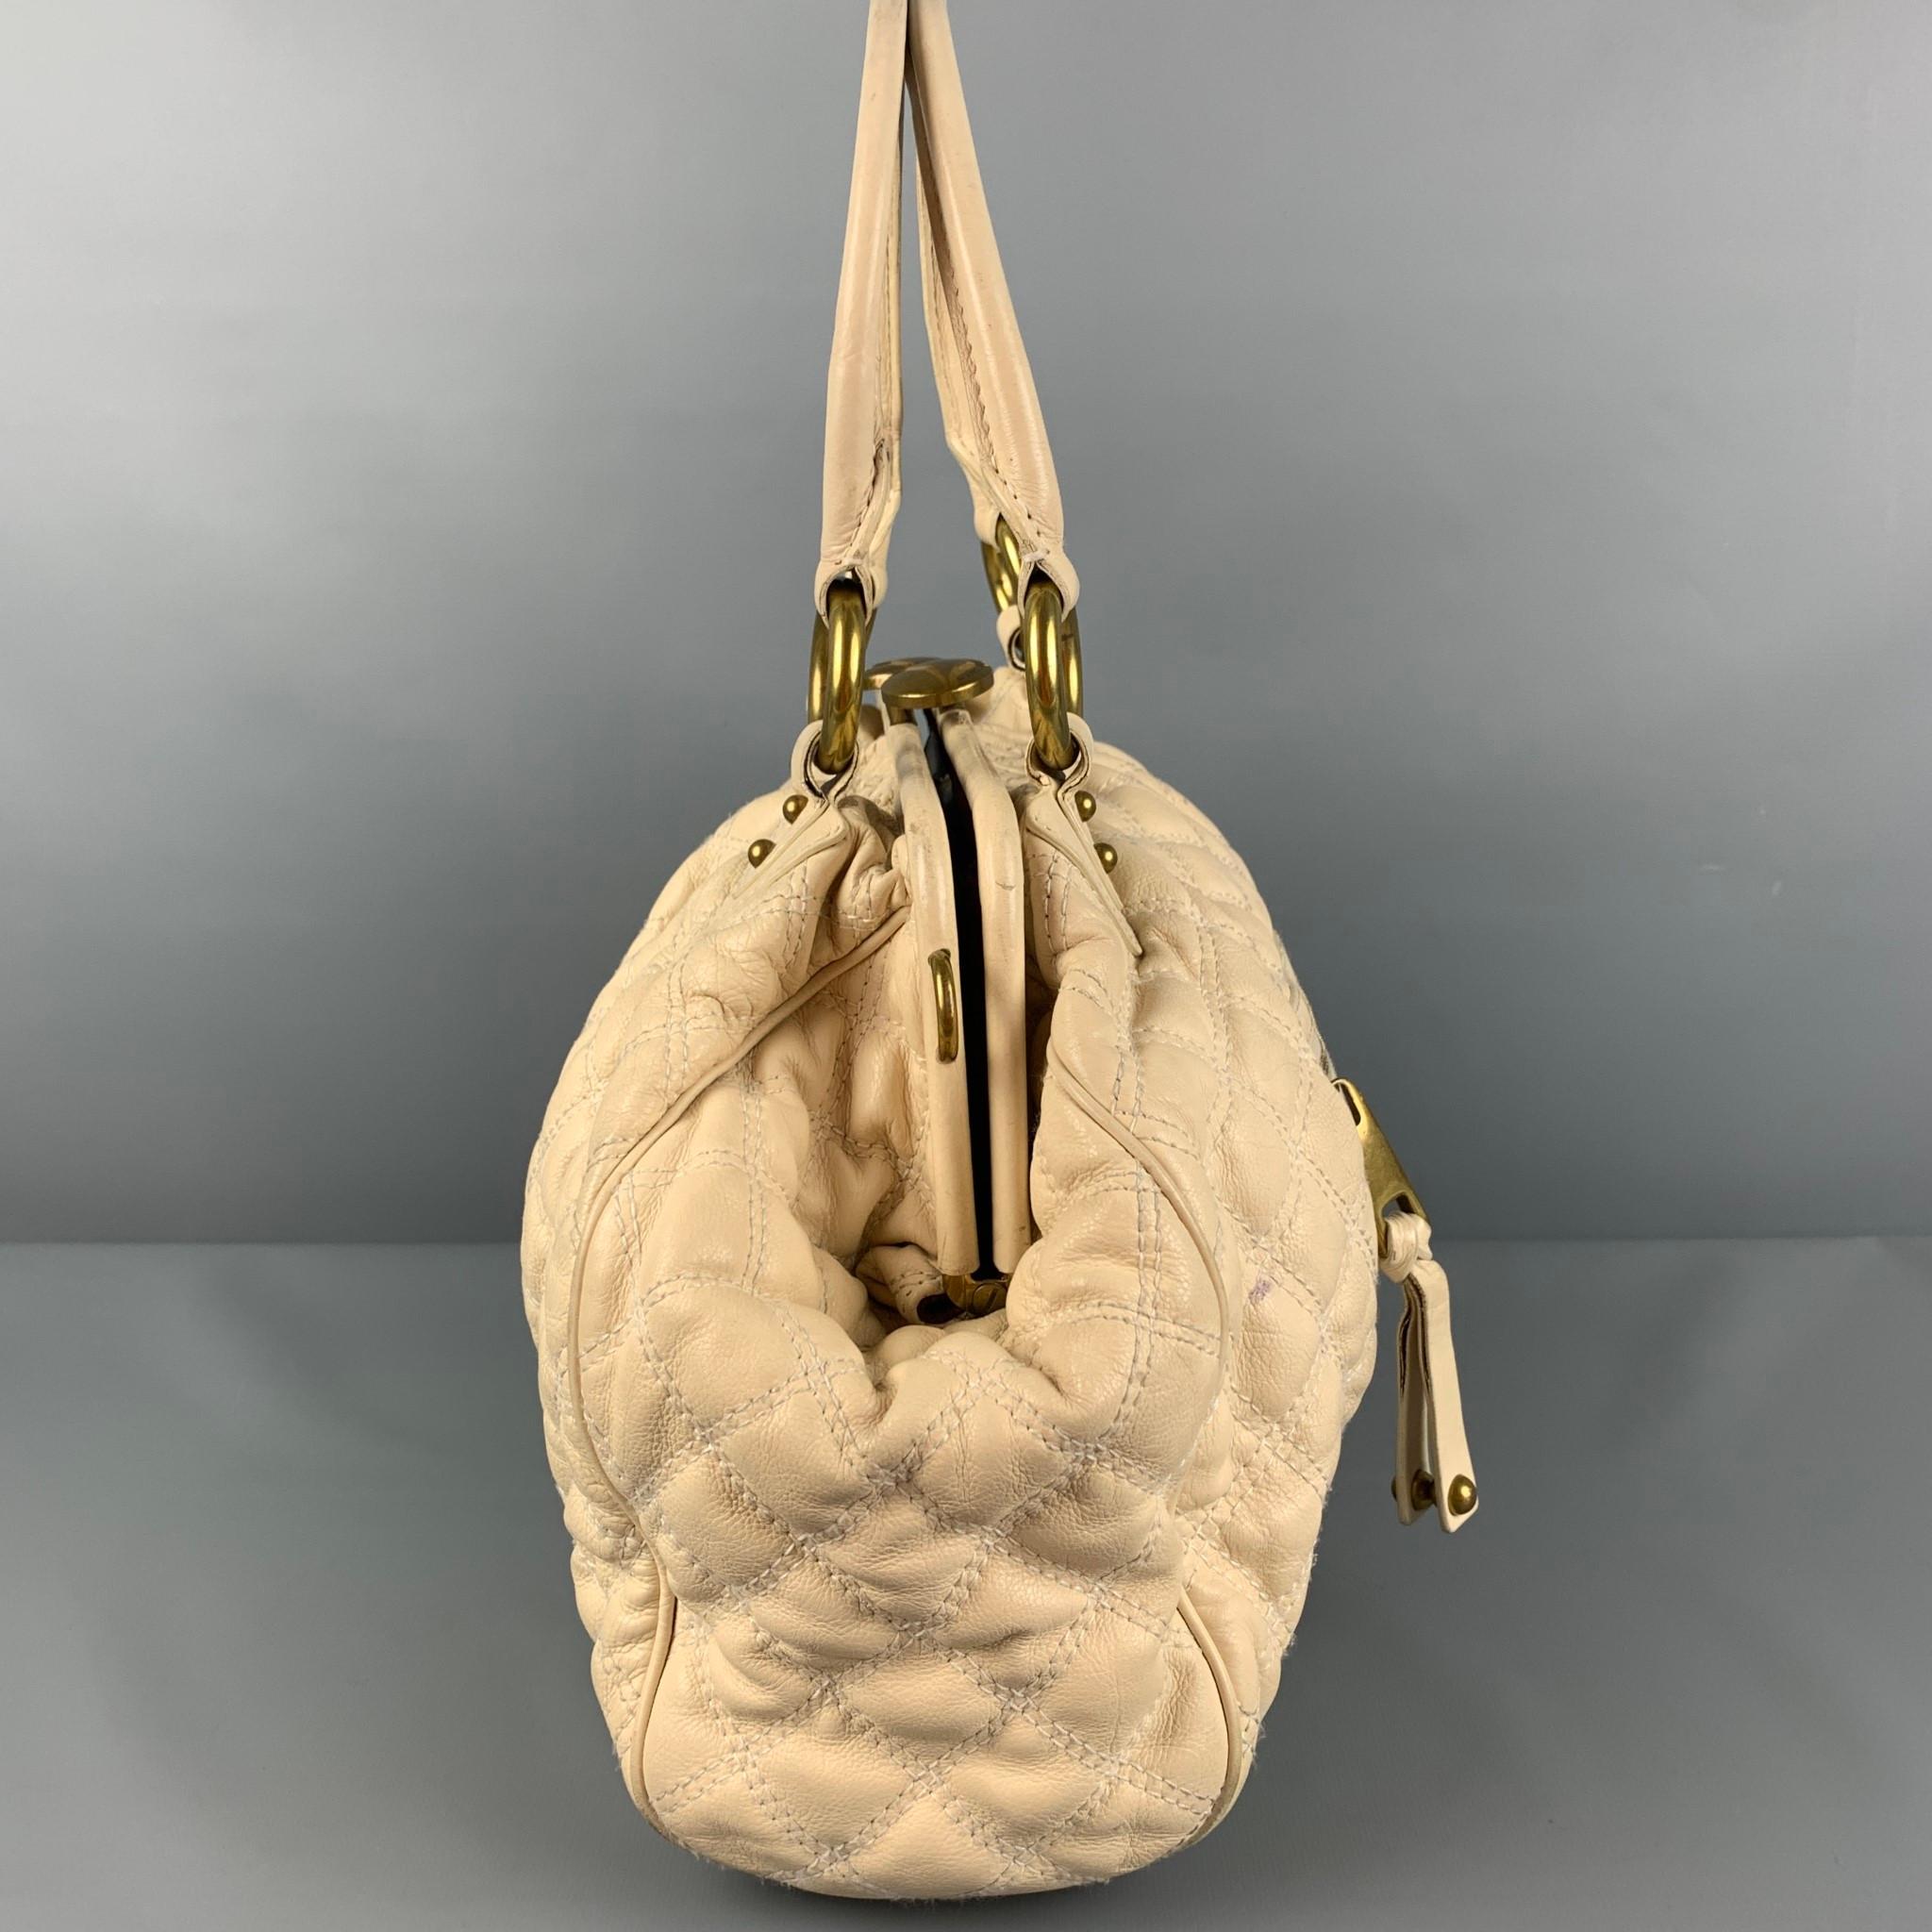 MARC JACOBS 'Stam' bag comes in a beige quilted leather featuring top handles, gold tone hardware, front zipper pocket, inner pocket, and a kiss-lock closure. 

Good Pre-Owned Condition. Moderate wear. Missing strap. As-Is.

Measurements:

Length: